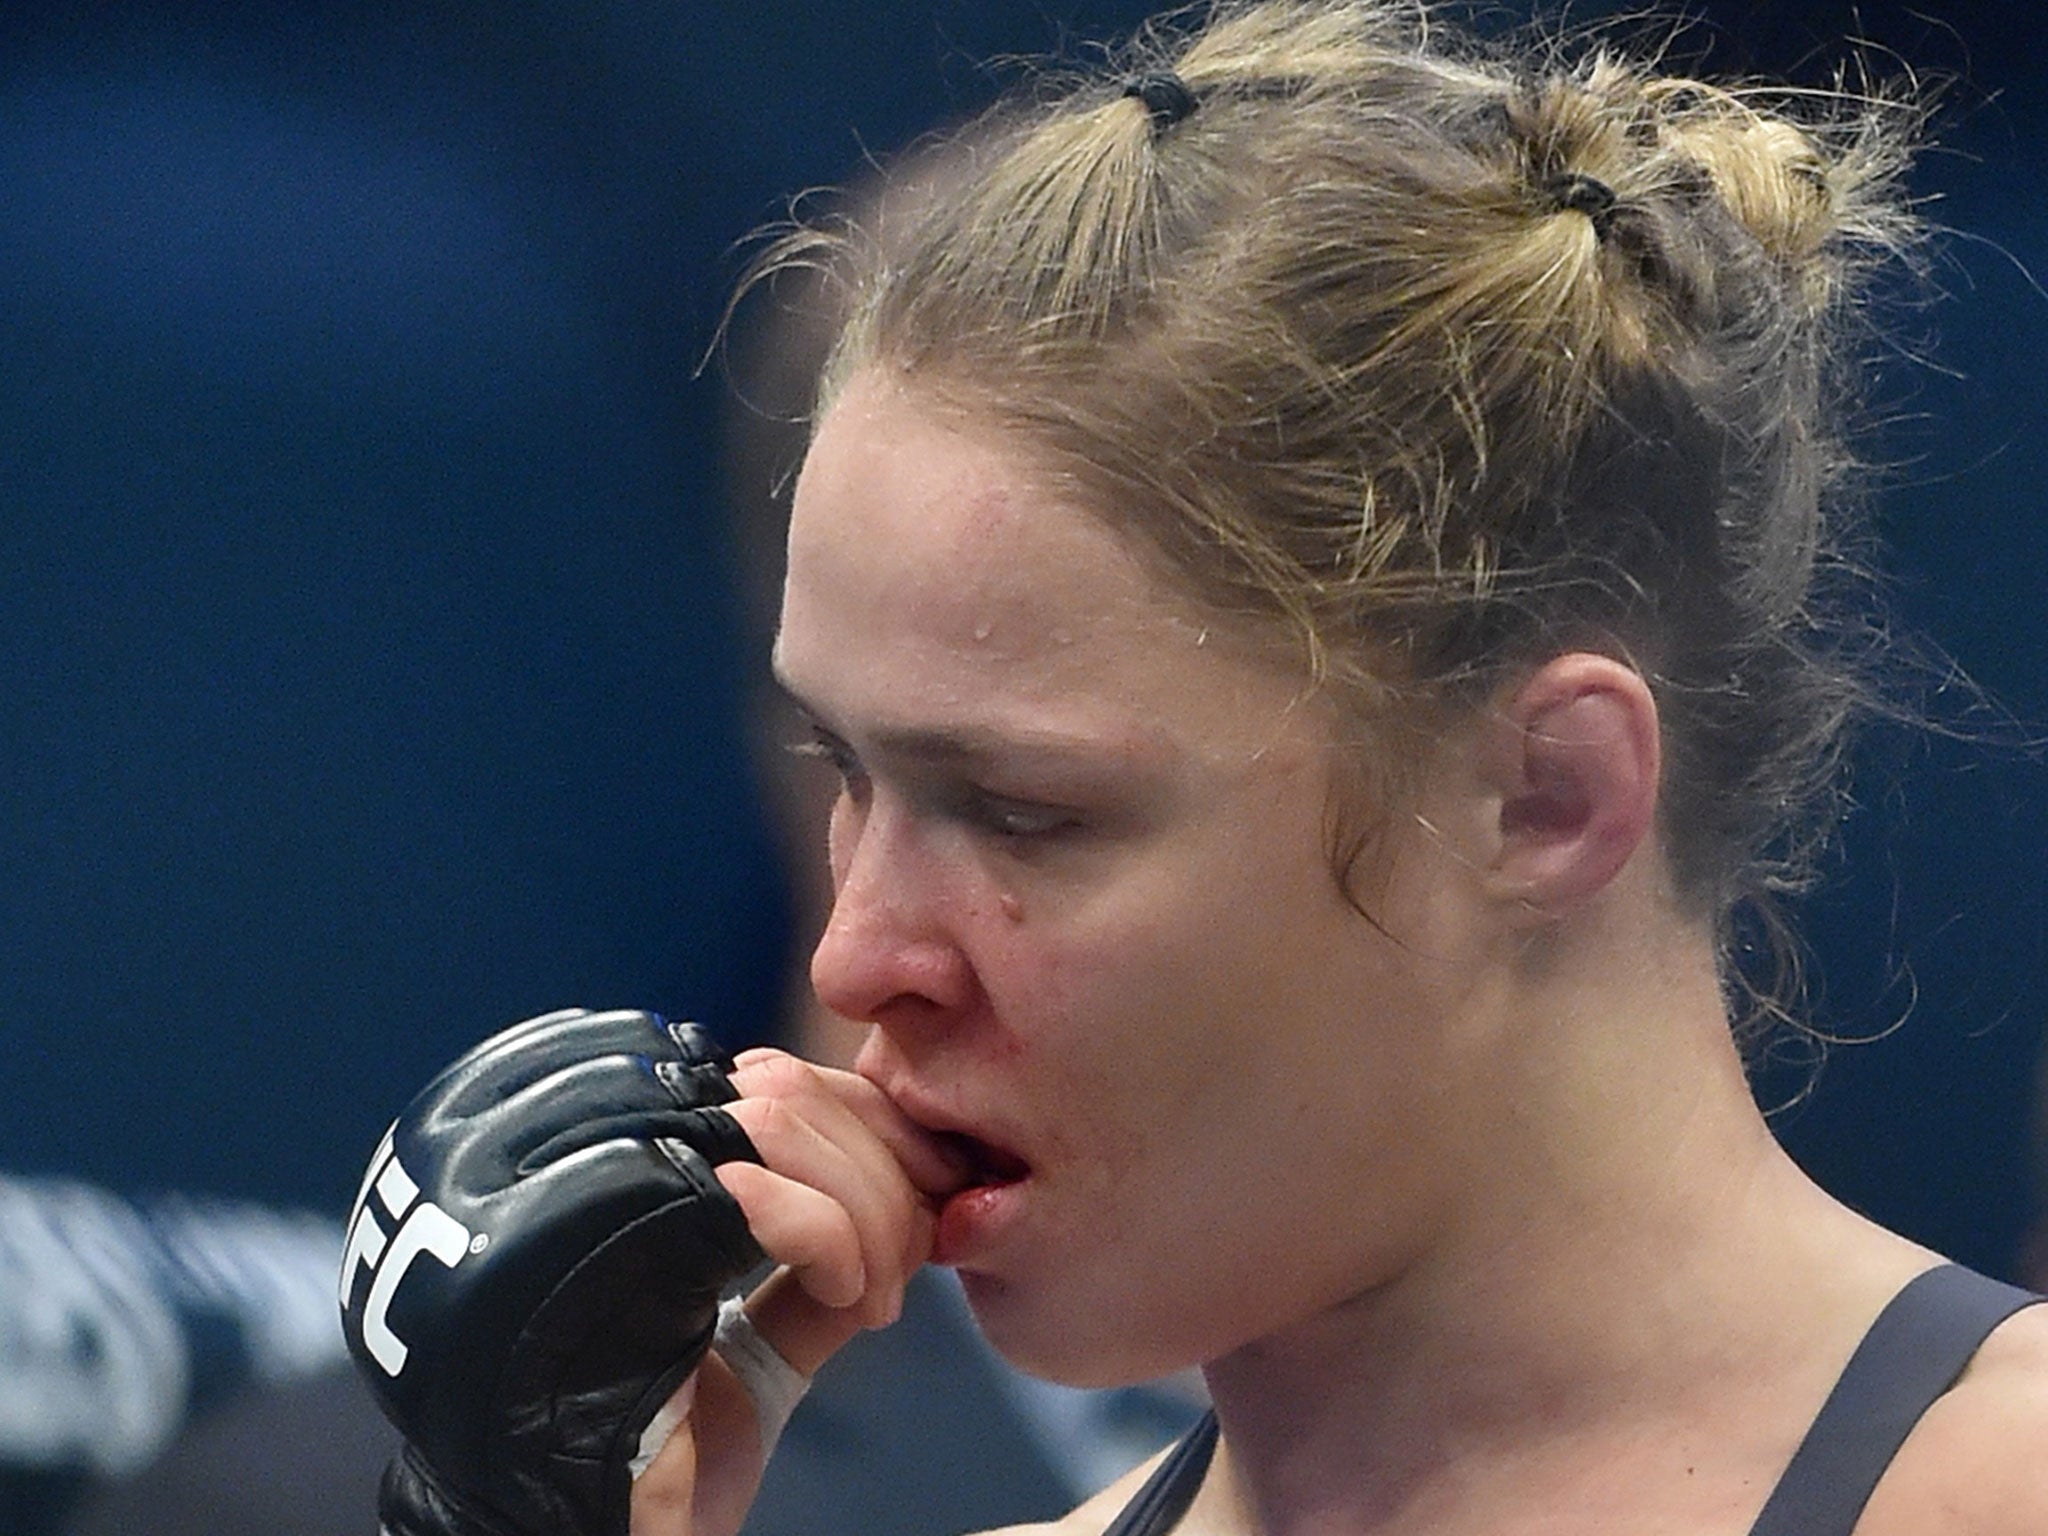 Jose Aldo believes Ronda Rousey will not return to the UFC